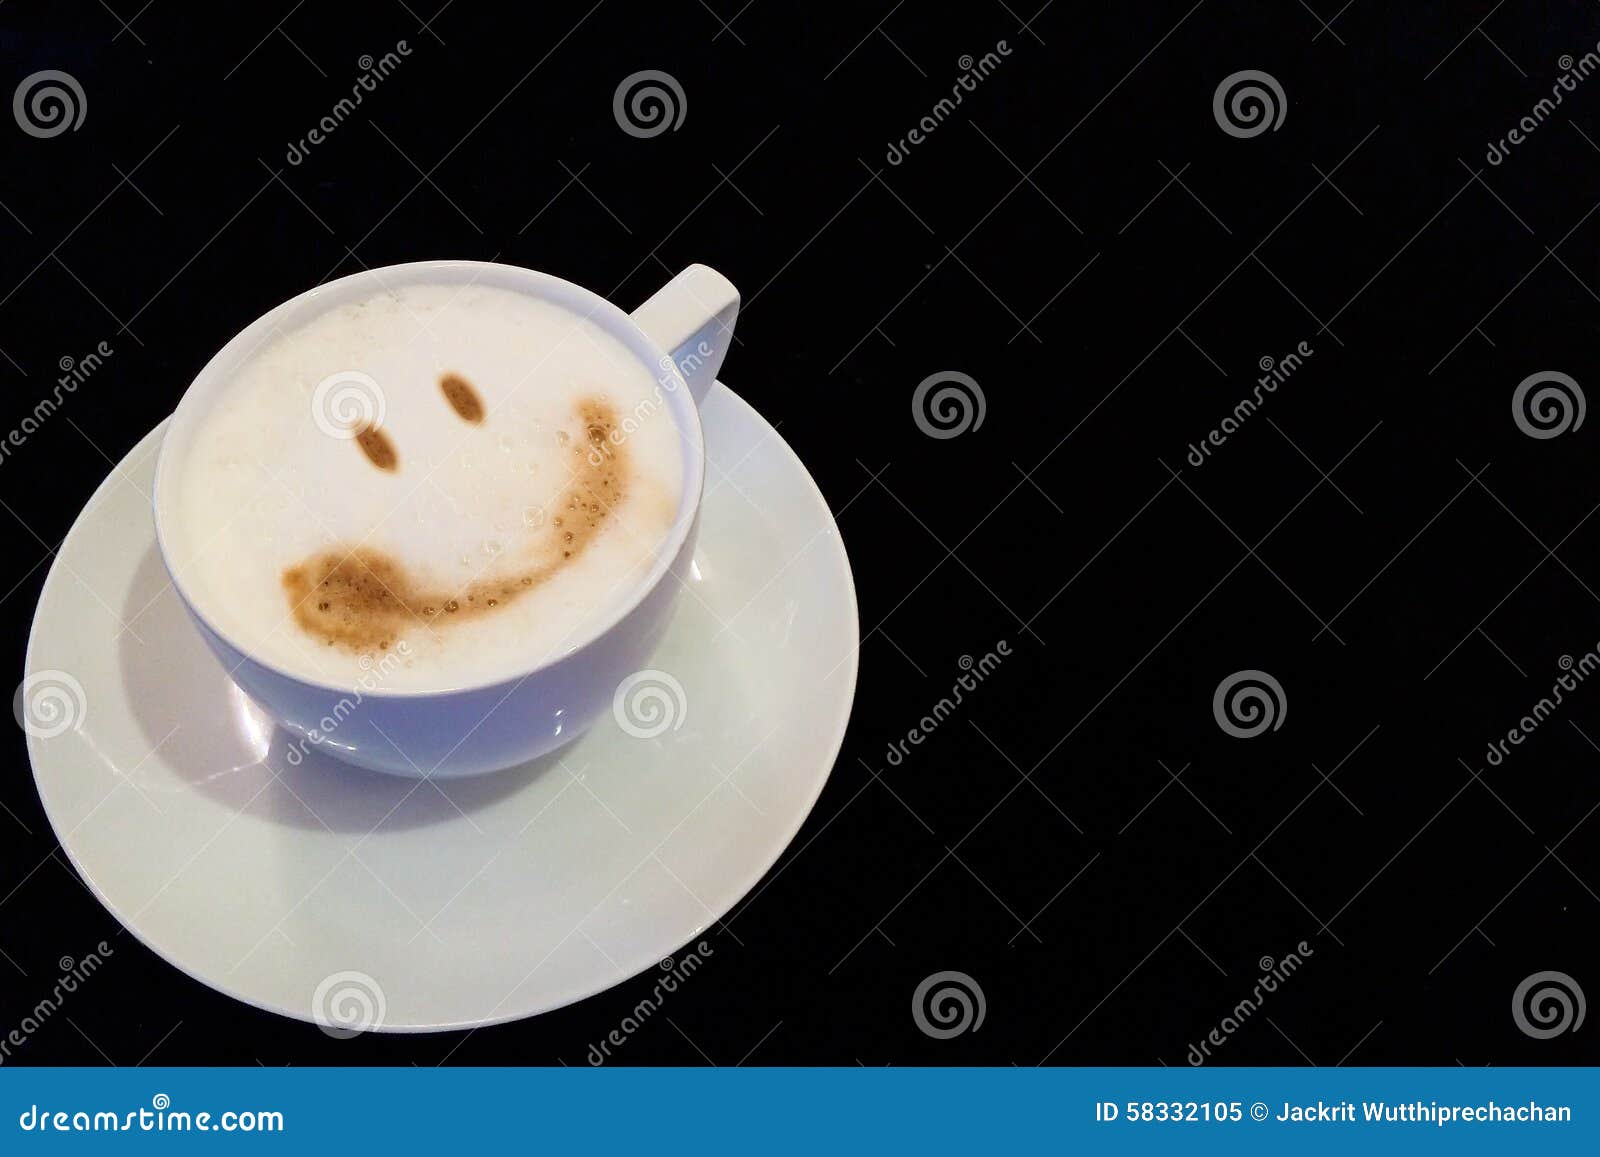 https://thumbs.dreamstime.com/z/start-big-day-smile-concept-cup-coffee-smile-face-corner-copyspace-to-input-text-used-as-template-58332105.jpg